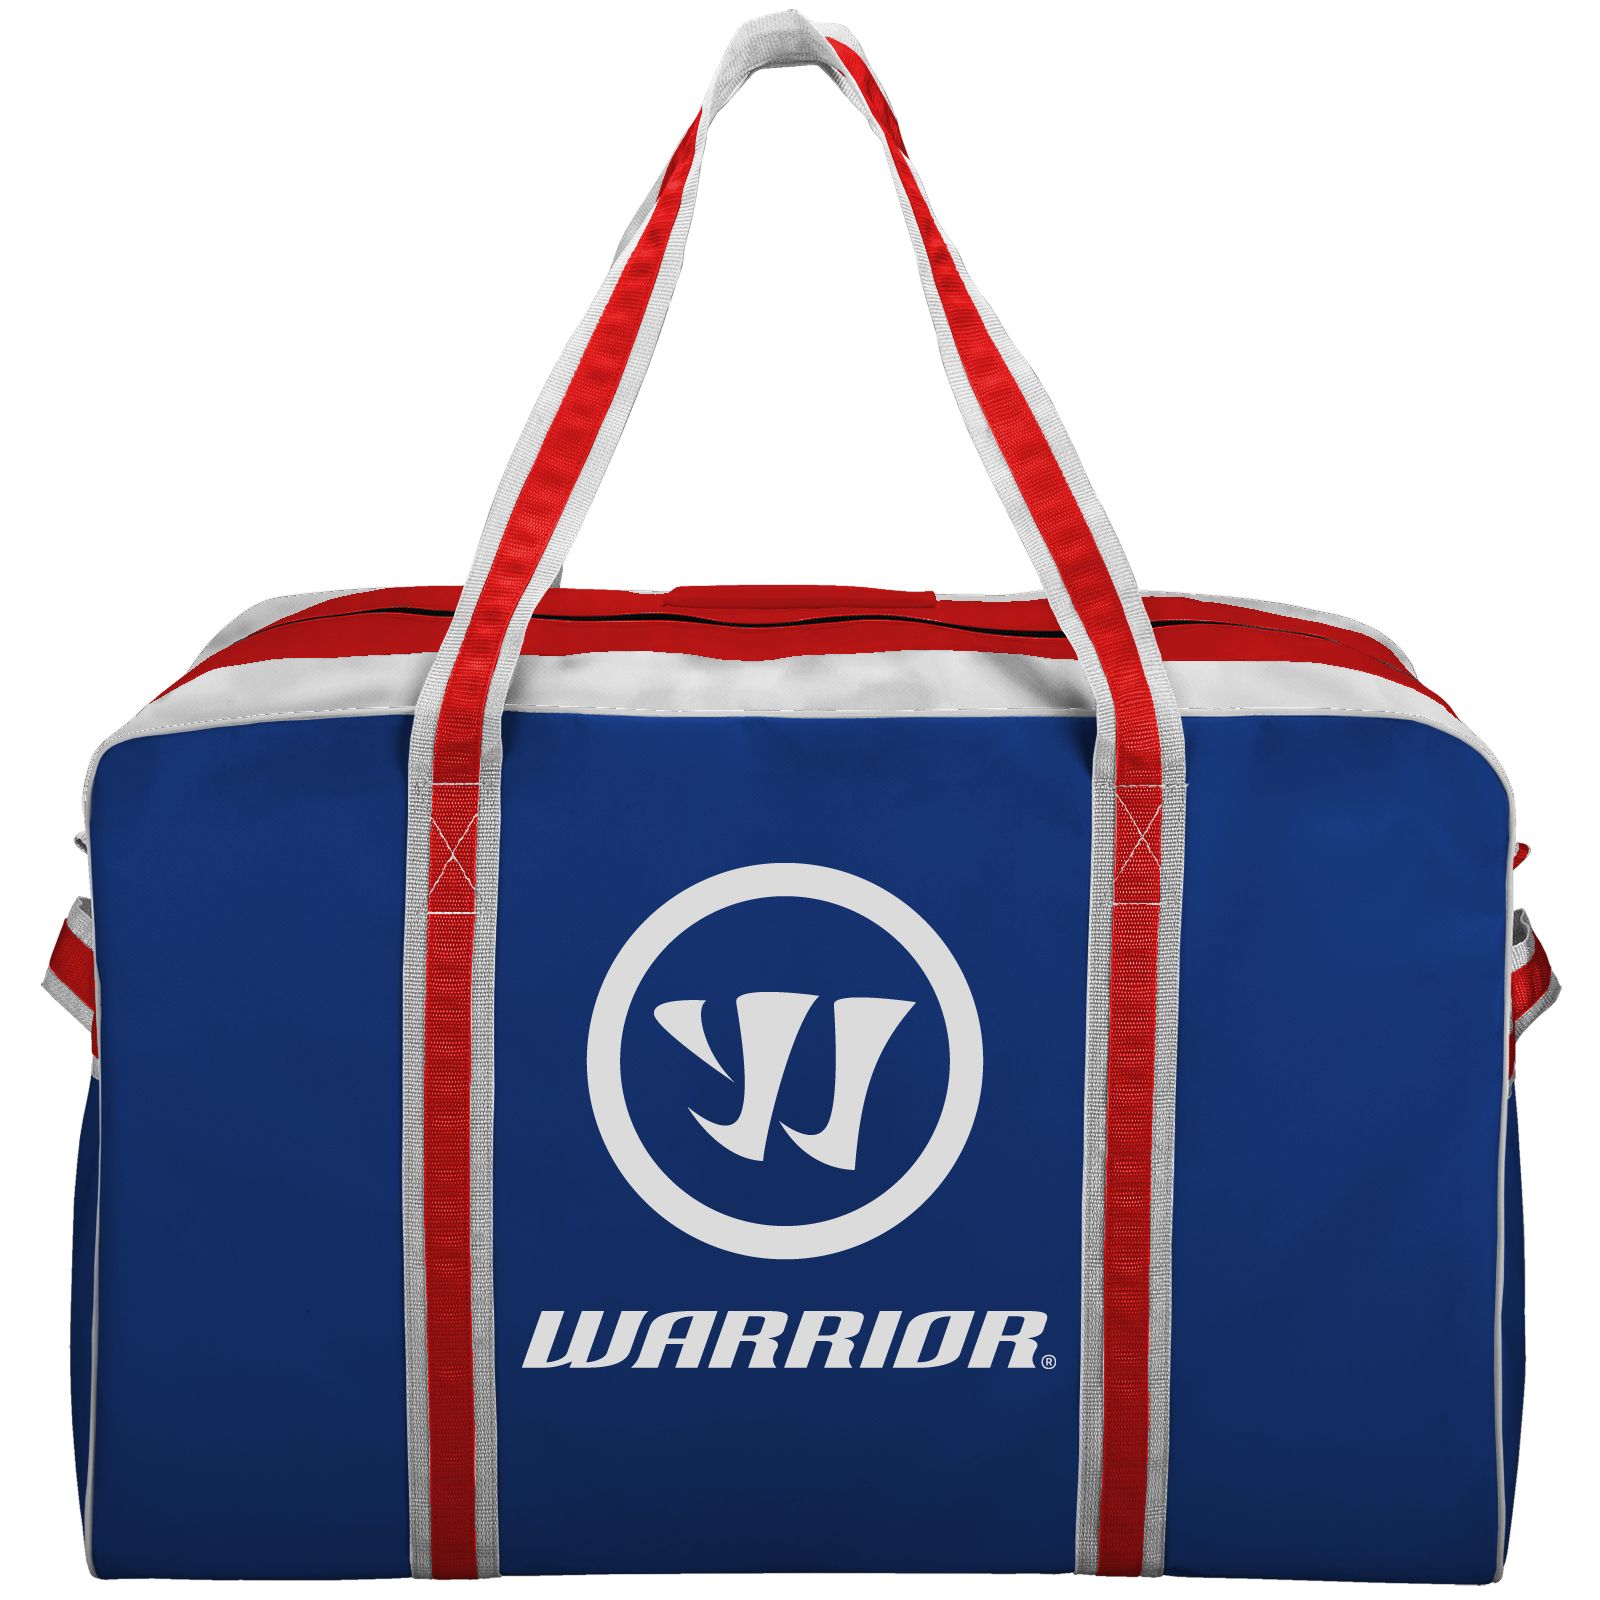 Warrior Pro Bag, Royal Blue with Red & White image number 0